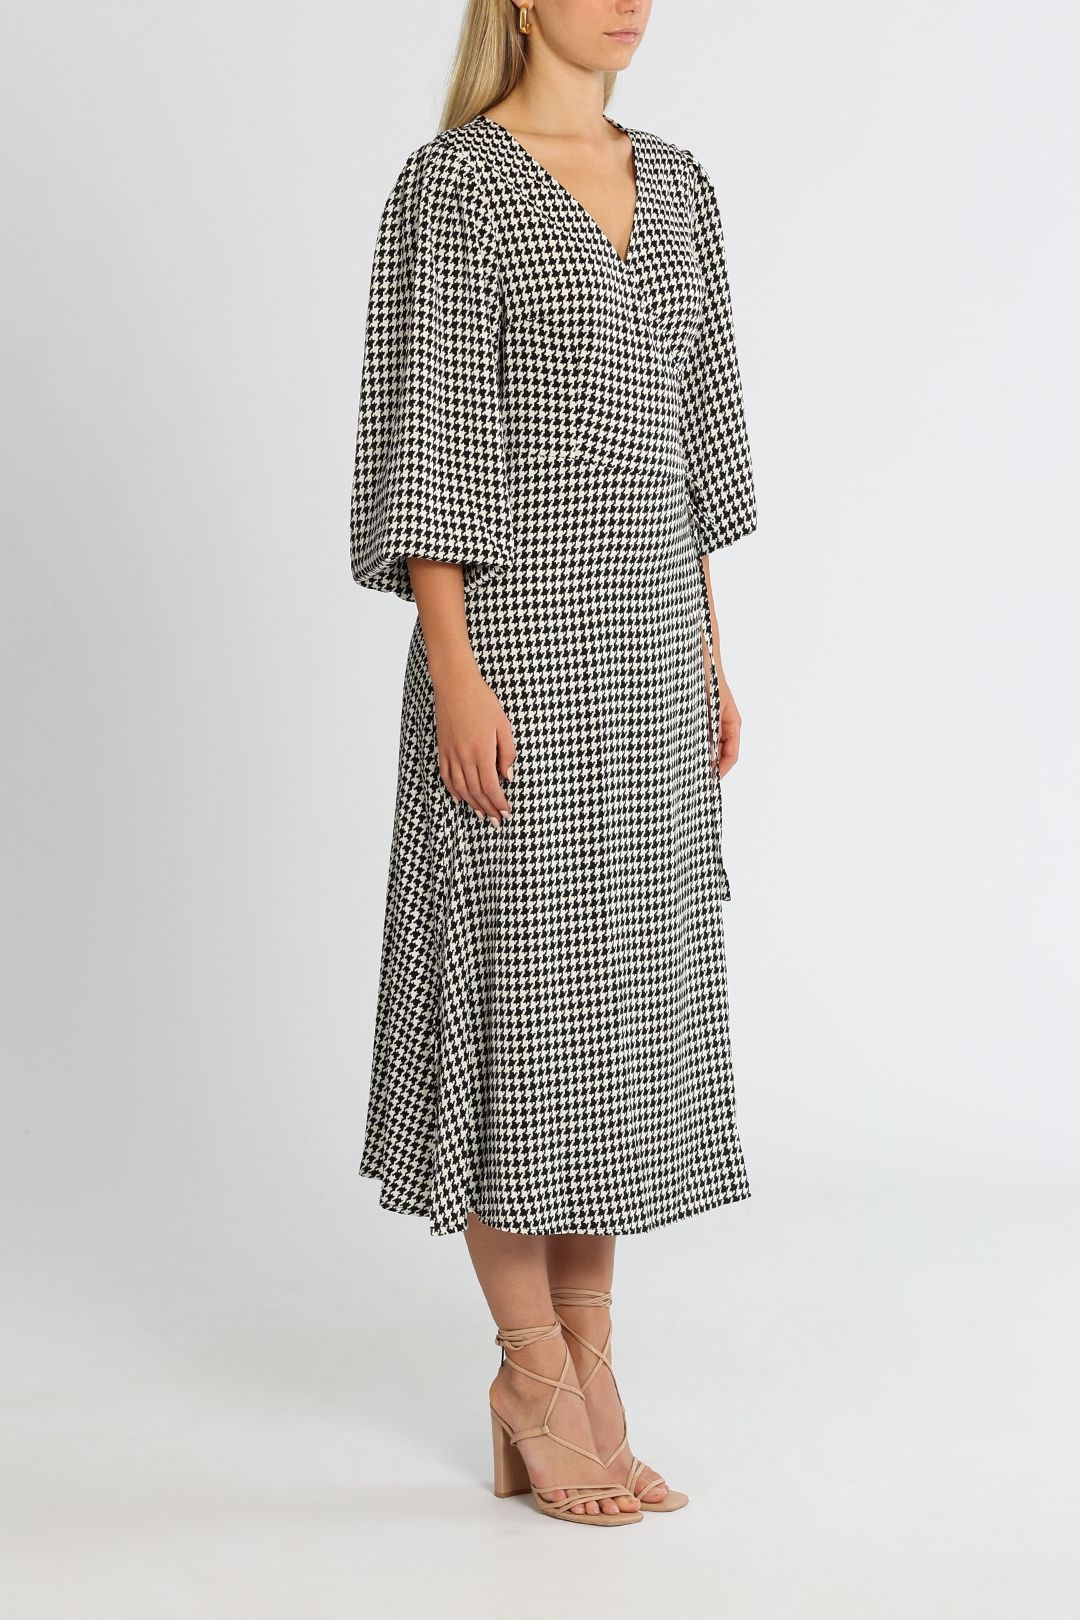 Brave and True Jessica Long Sleeve Dress Black Houndstooth Wrap